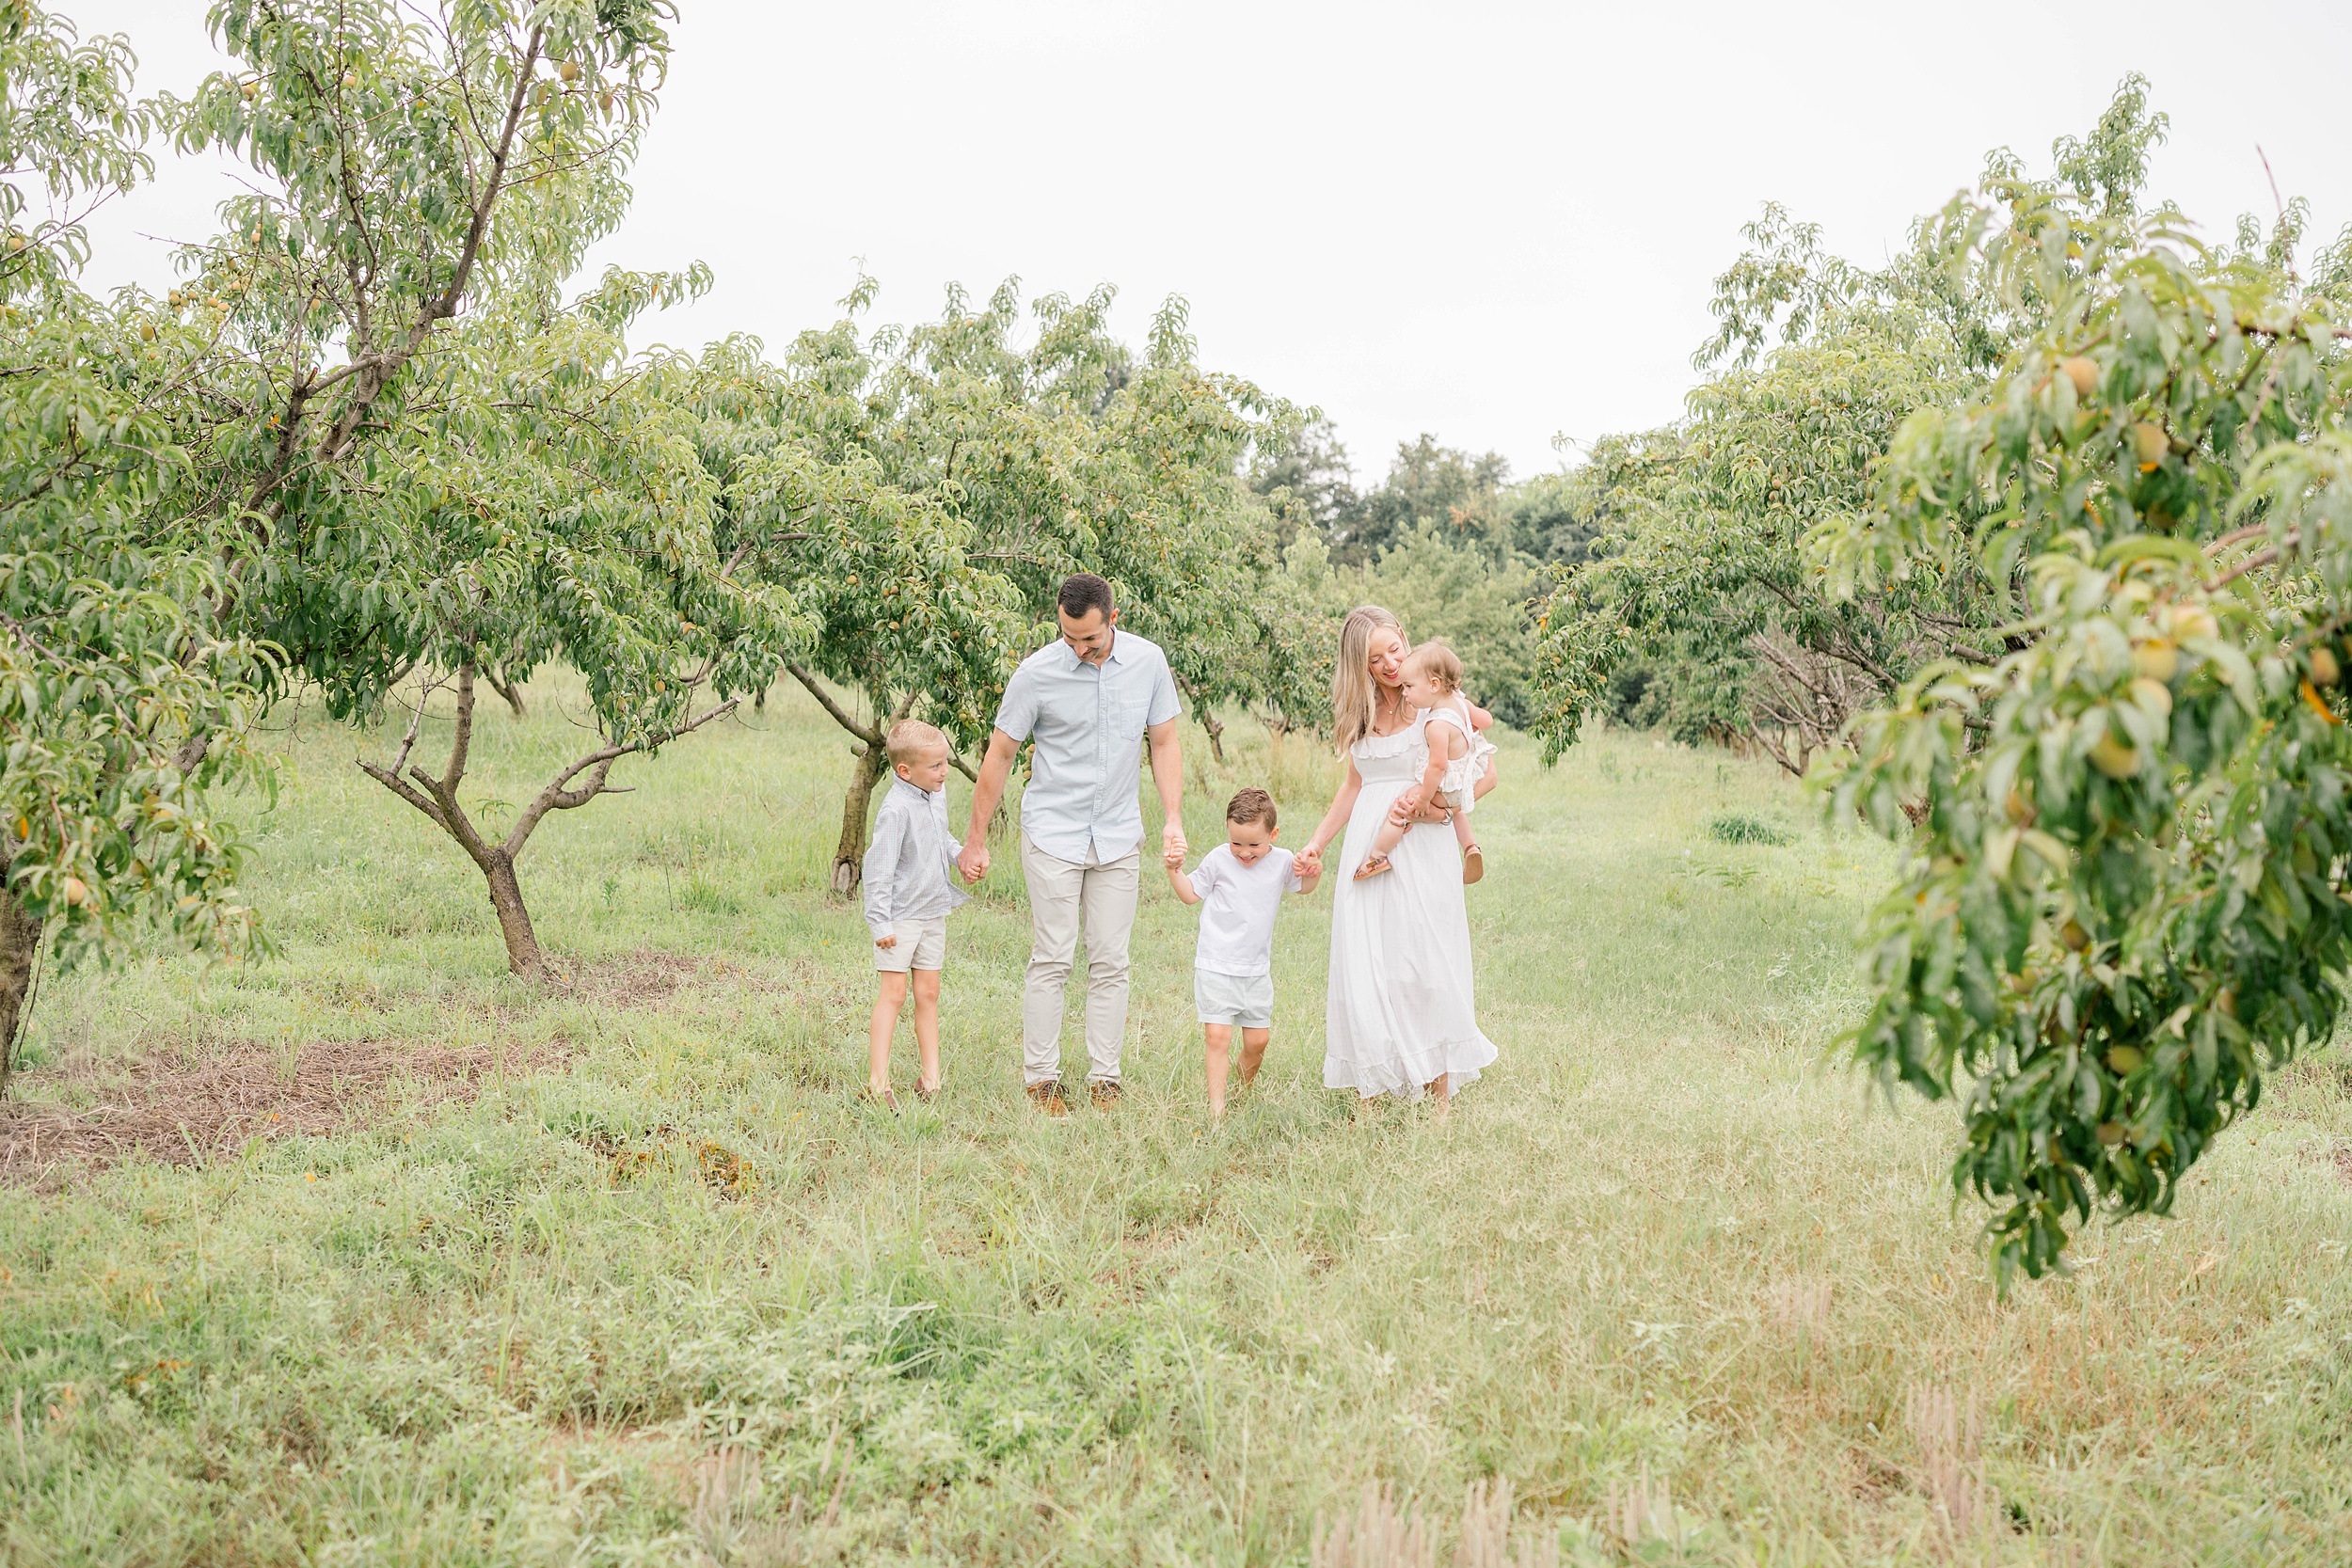 A mom and dad walk their 2 young sons through a peach orchard while mom carries their toddler daughter